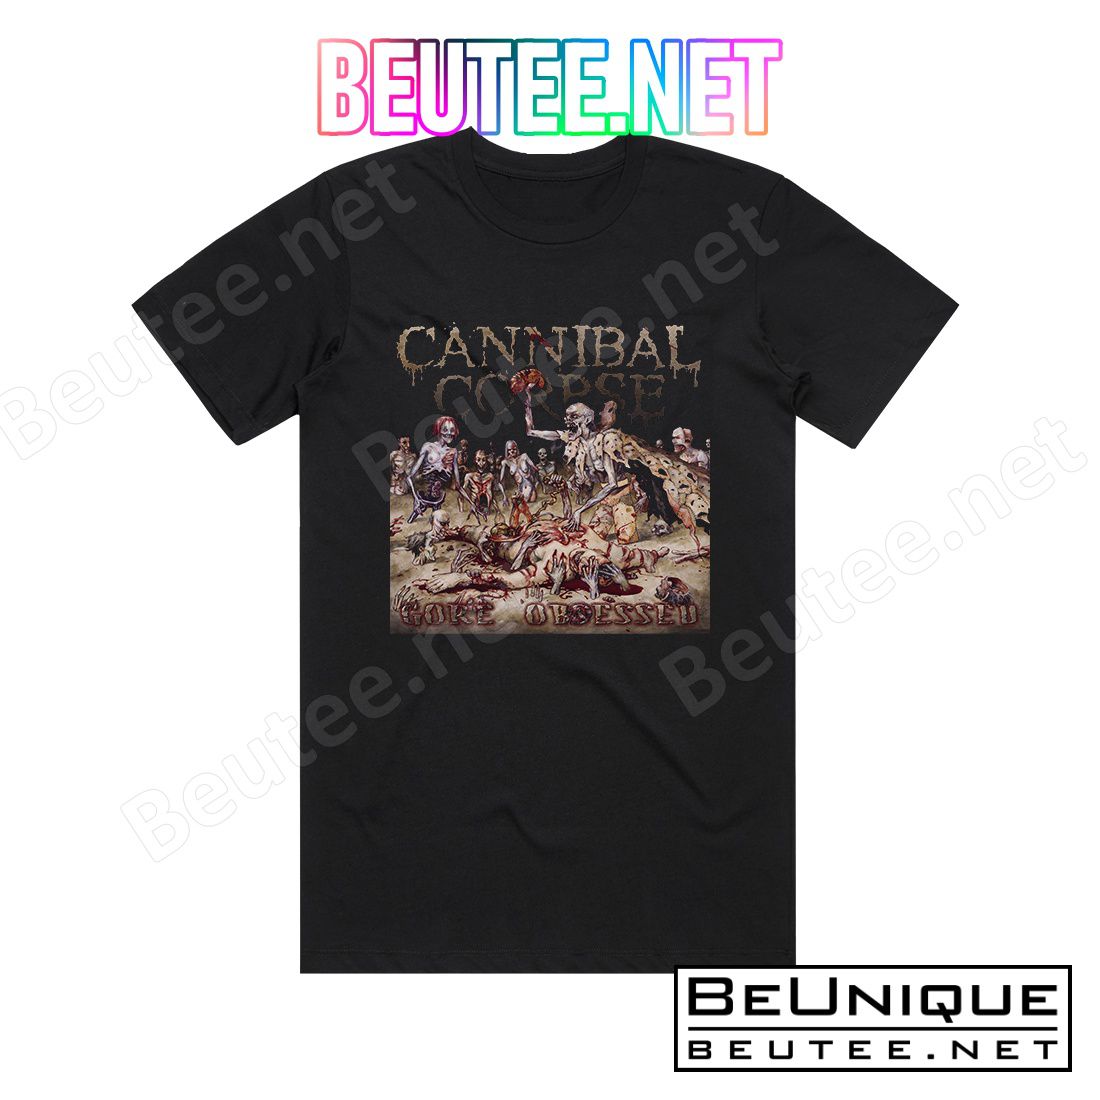 Cannibal Corpse Gore Obsessed Album Cover T-Shirt